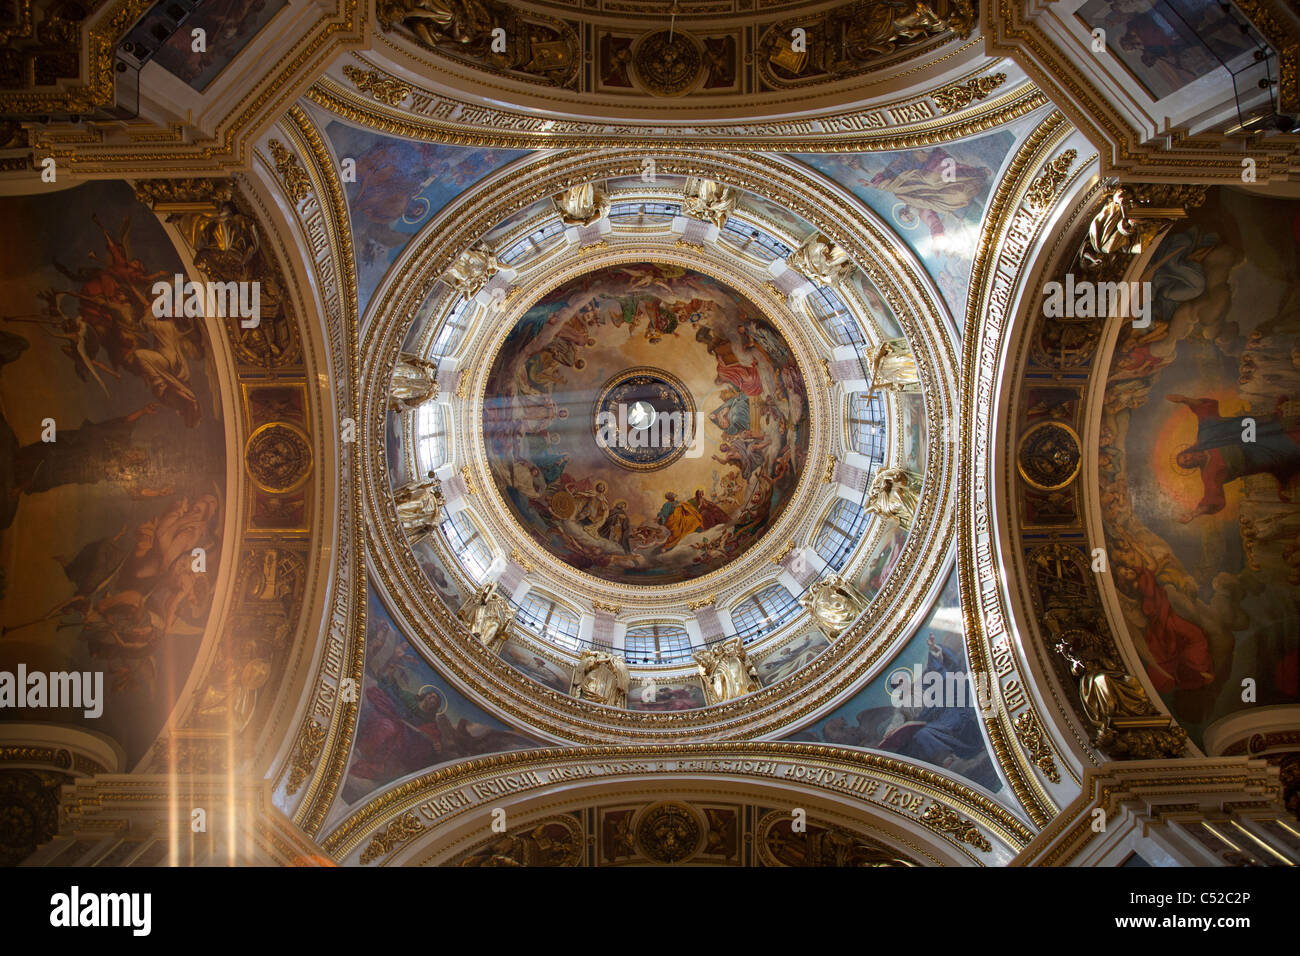 Saint Isaac's Cathedral, St. Petersburg Russia – interior 15 Stock Photo